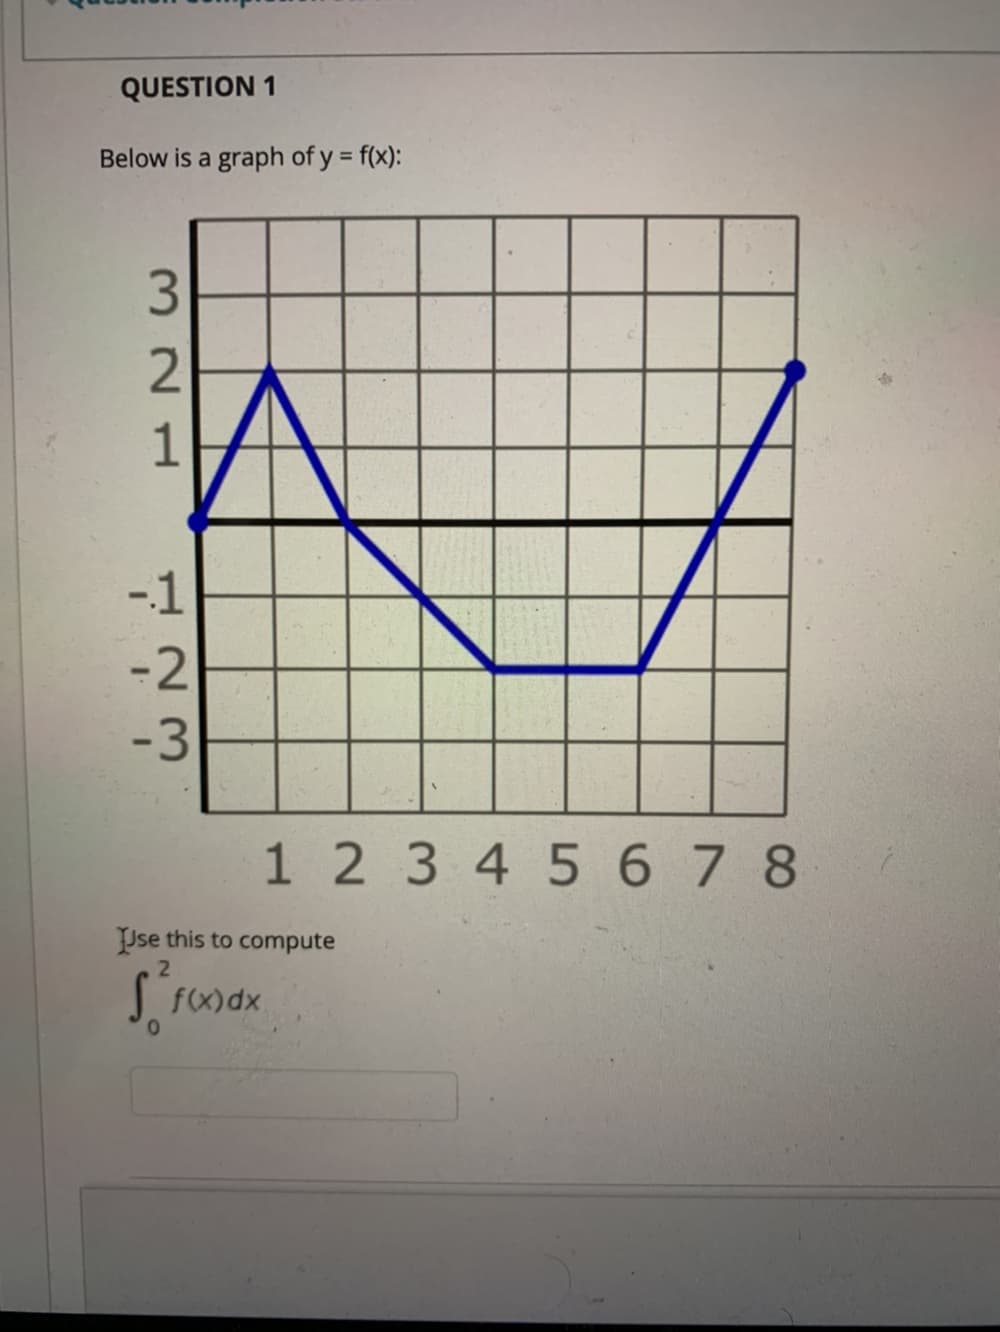 QUESTION 1
Below is a graph of y = f(x):
%3D
3.
2.
-1
-2
-3
1 2 345678
Use this to compute
f(x)dx
